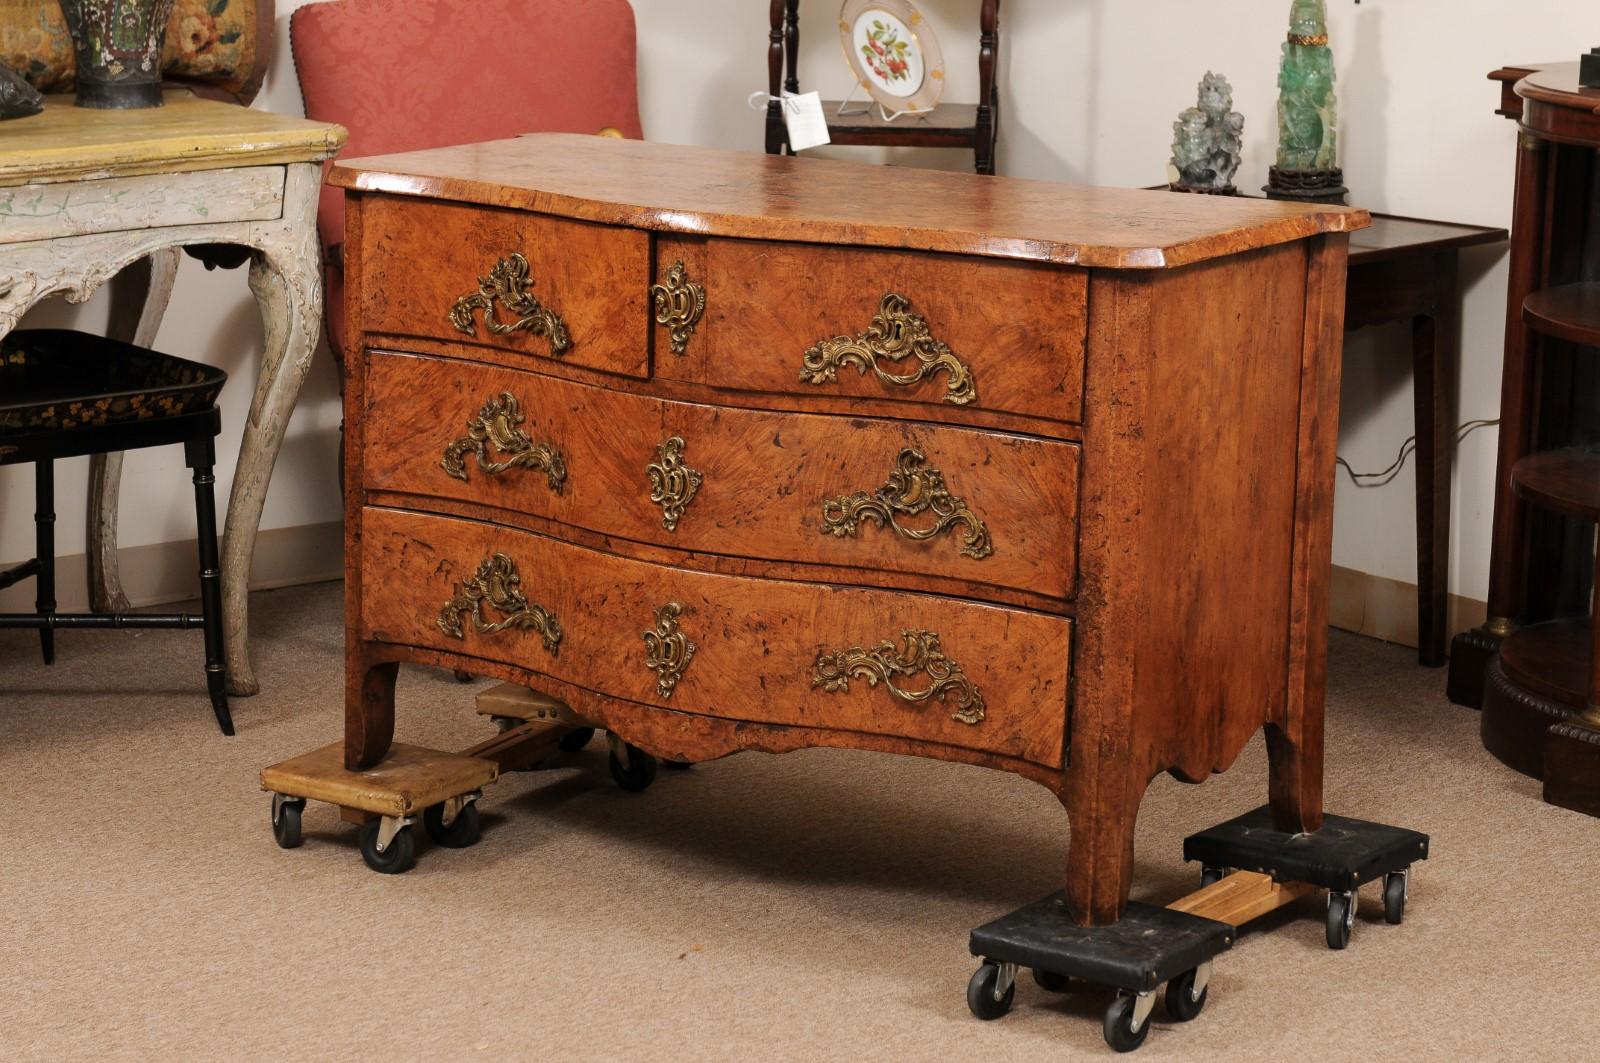 Serpentine Commode in Burled Elm with 4 Drawers & Bronze Hardware, 18th Century Northern Italy